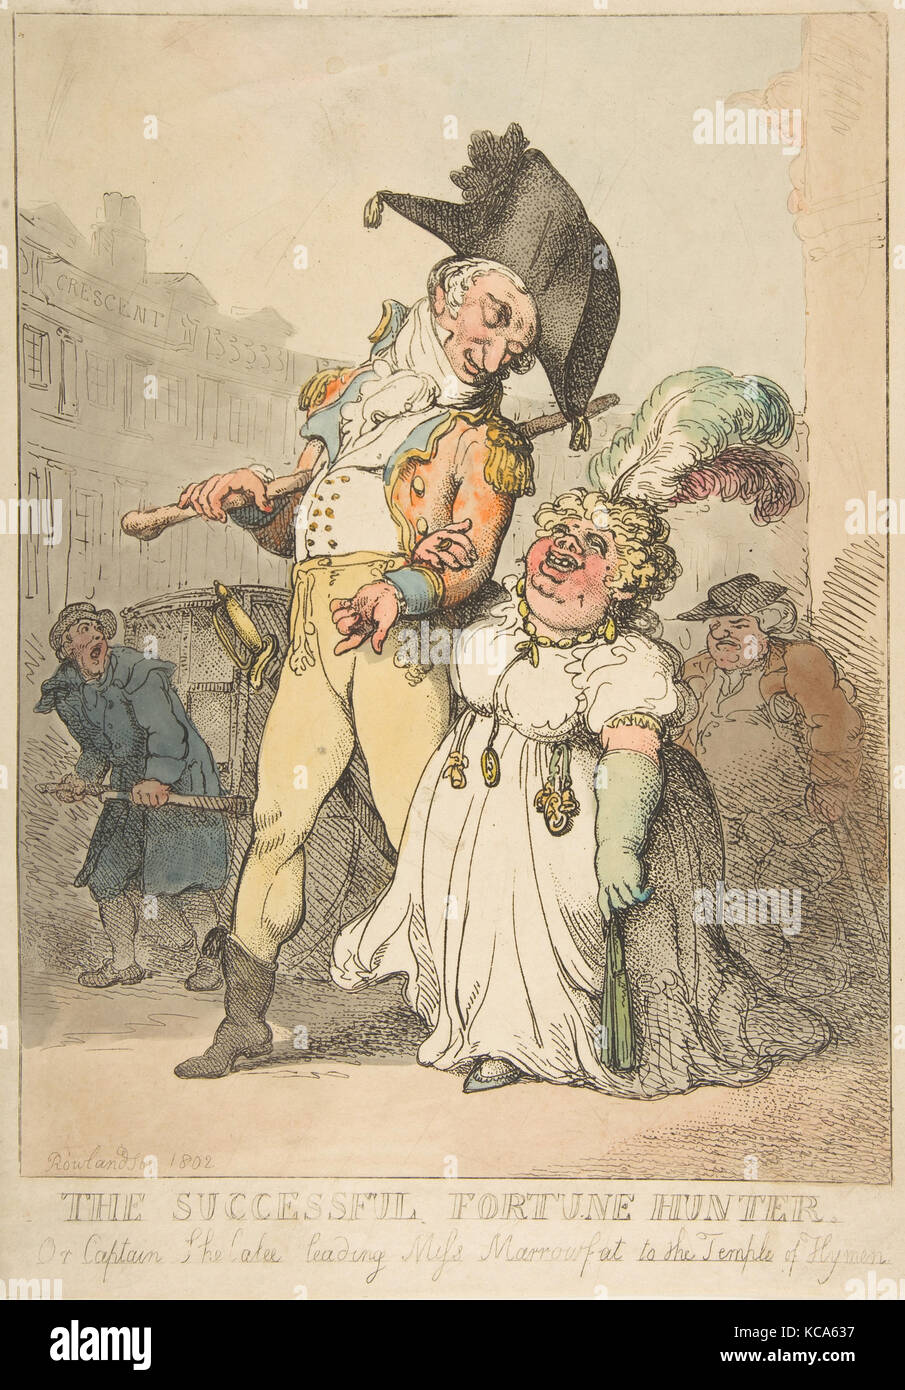 The Successful Fortune Hunter, or Captain Shelalee Leading Miss Marrowfat to the Temple of Hymen, Thomas Rowlandson, 1802 Stock Photo